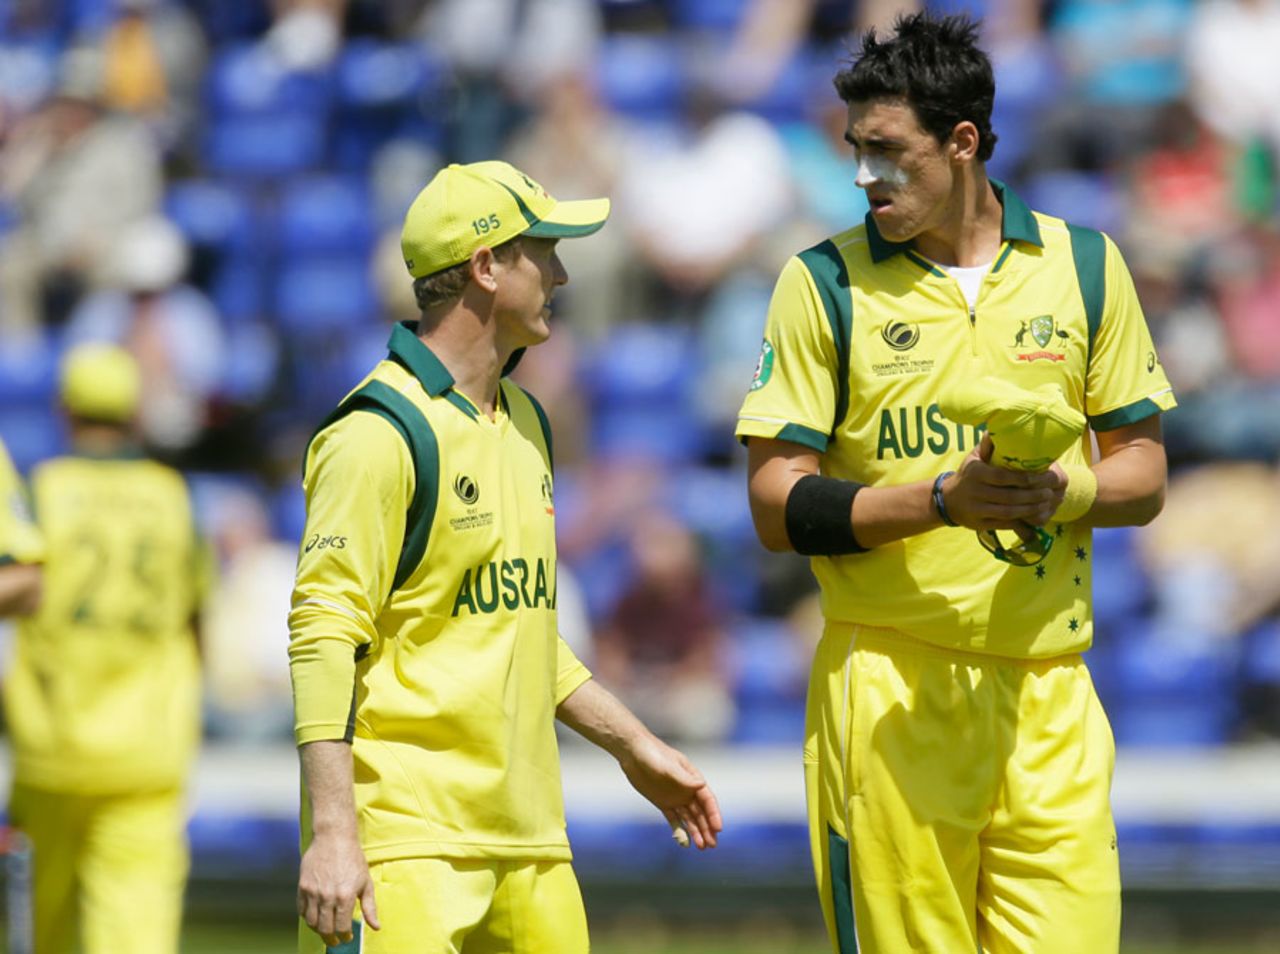 Mitchell Starc discusses tactics with George Bailey, Australia v West Indies, Champions Trophy 2013 warm-up match, Cardiff, June 1